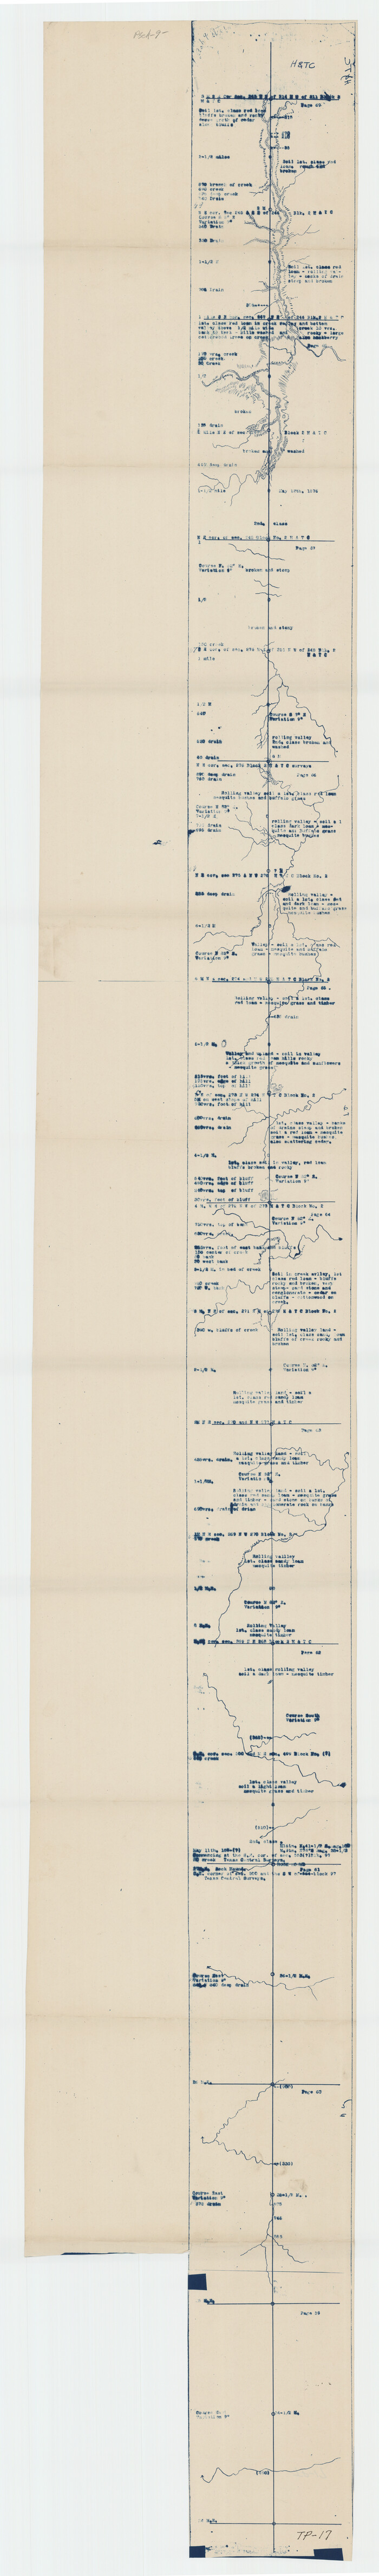 93182, [Strip Map showing T. & P. connecting lines], Twichell Survey Records